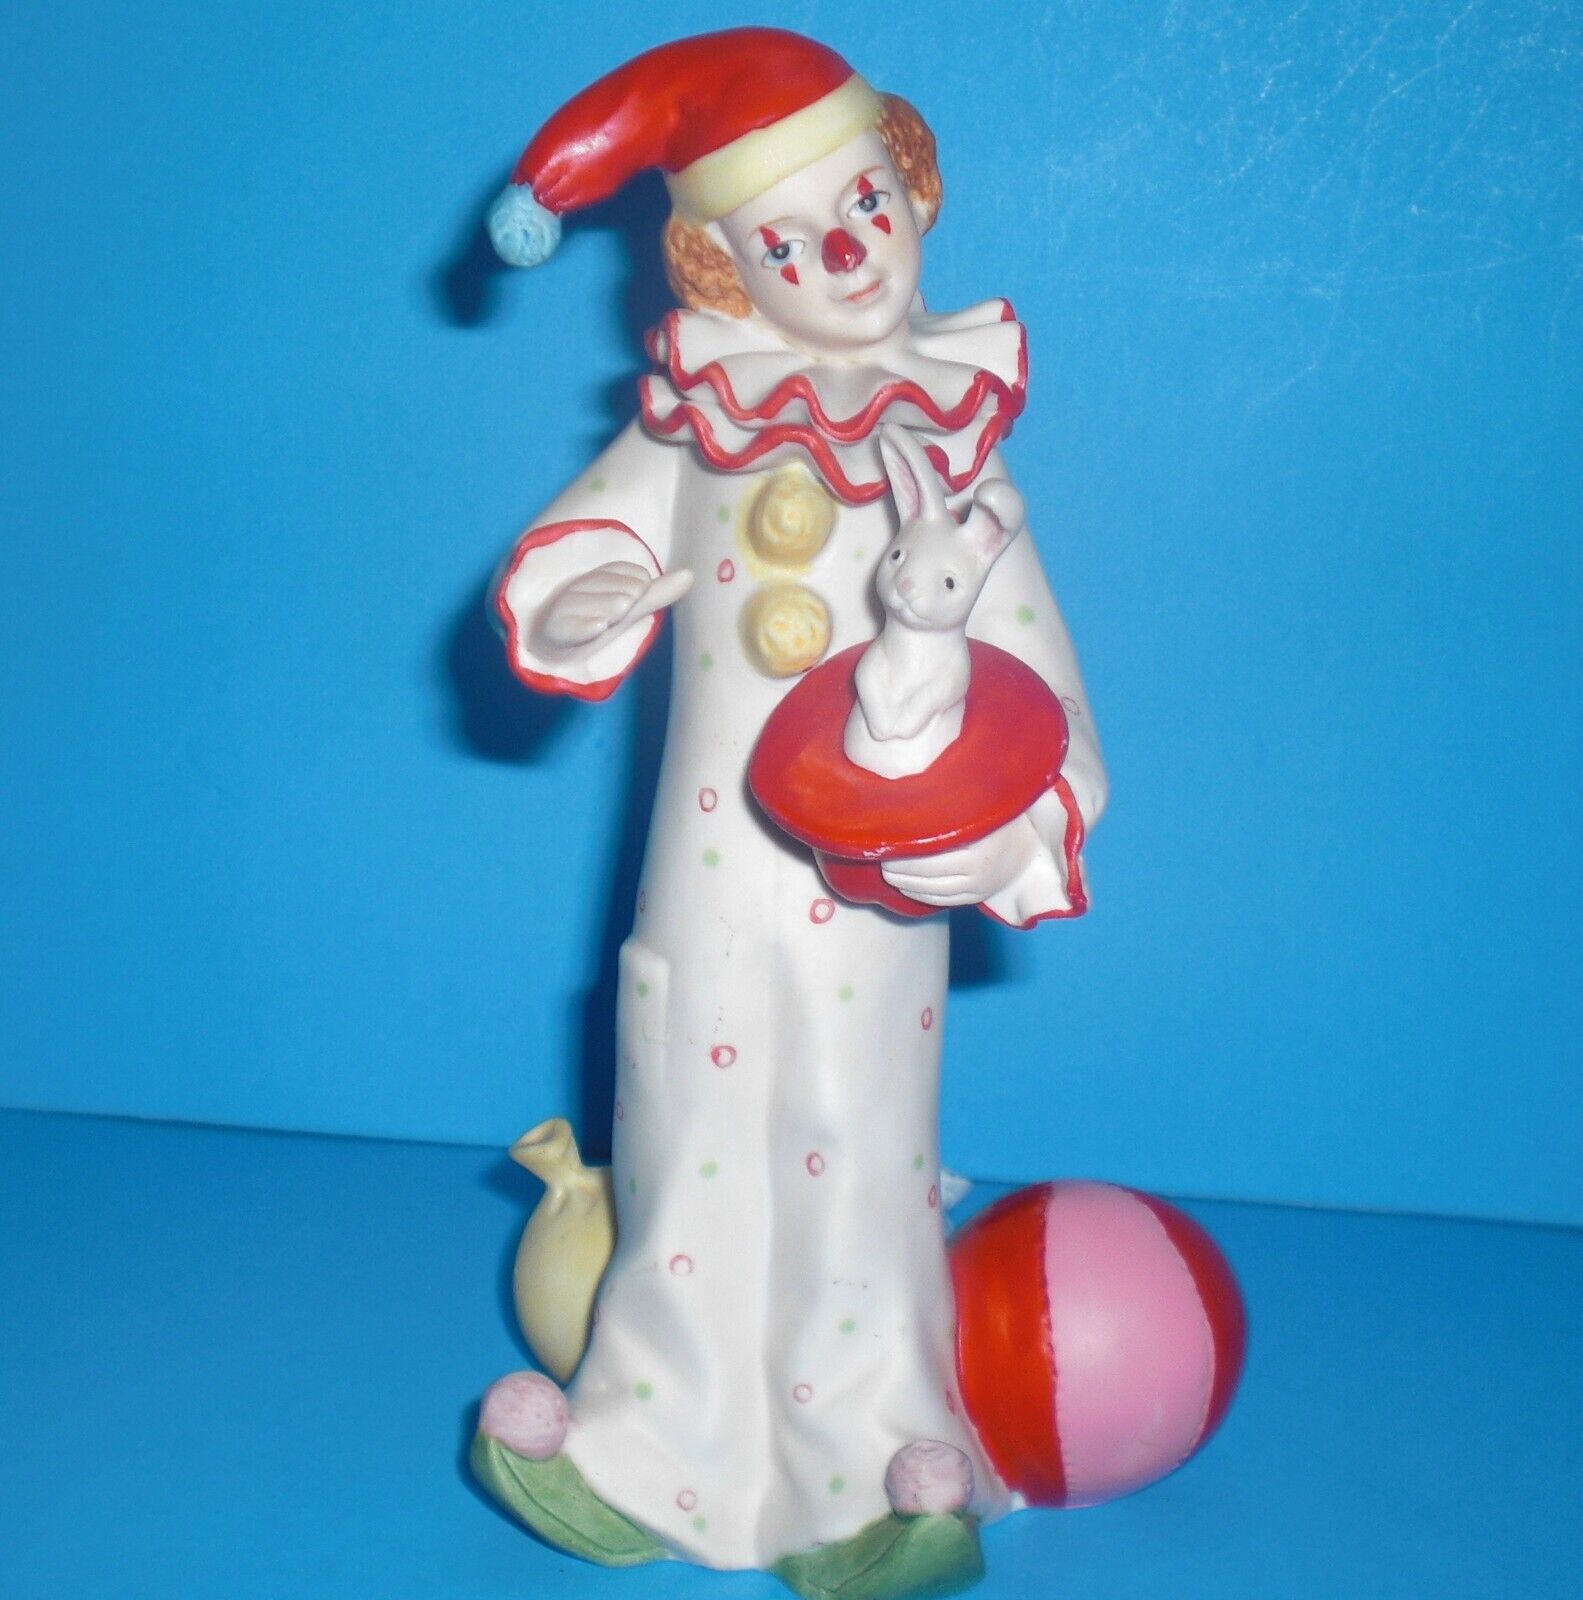 Lefton China Clown and Rabbit Figurine - Hand Painted - #05323 – Vintage 1985